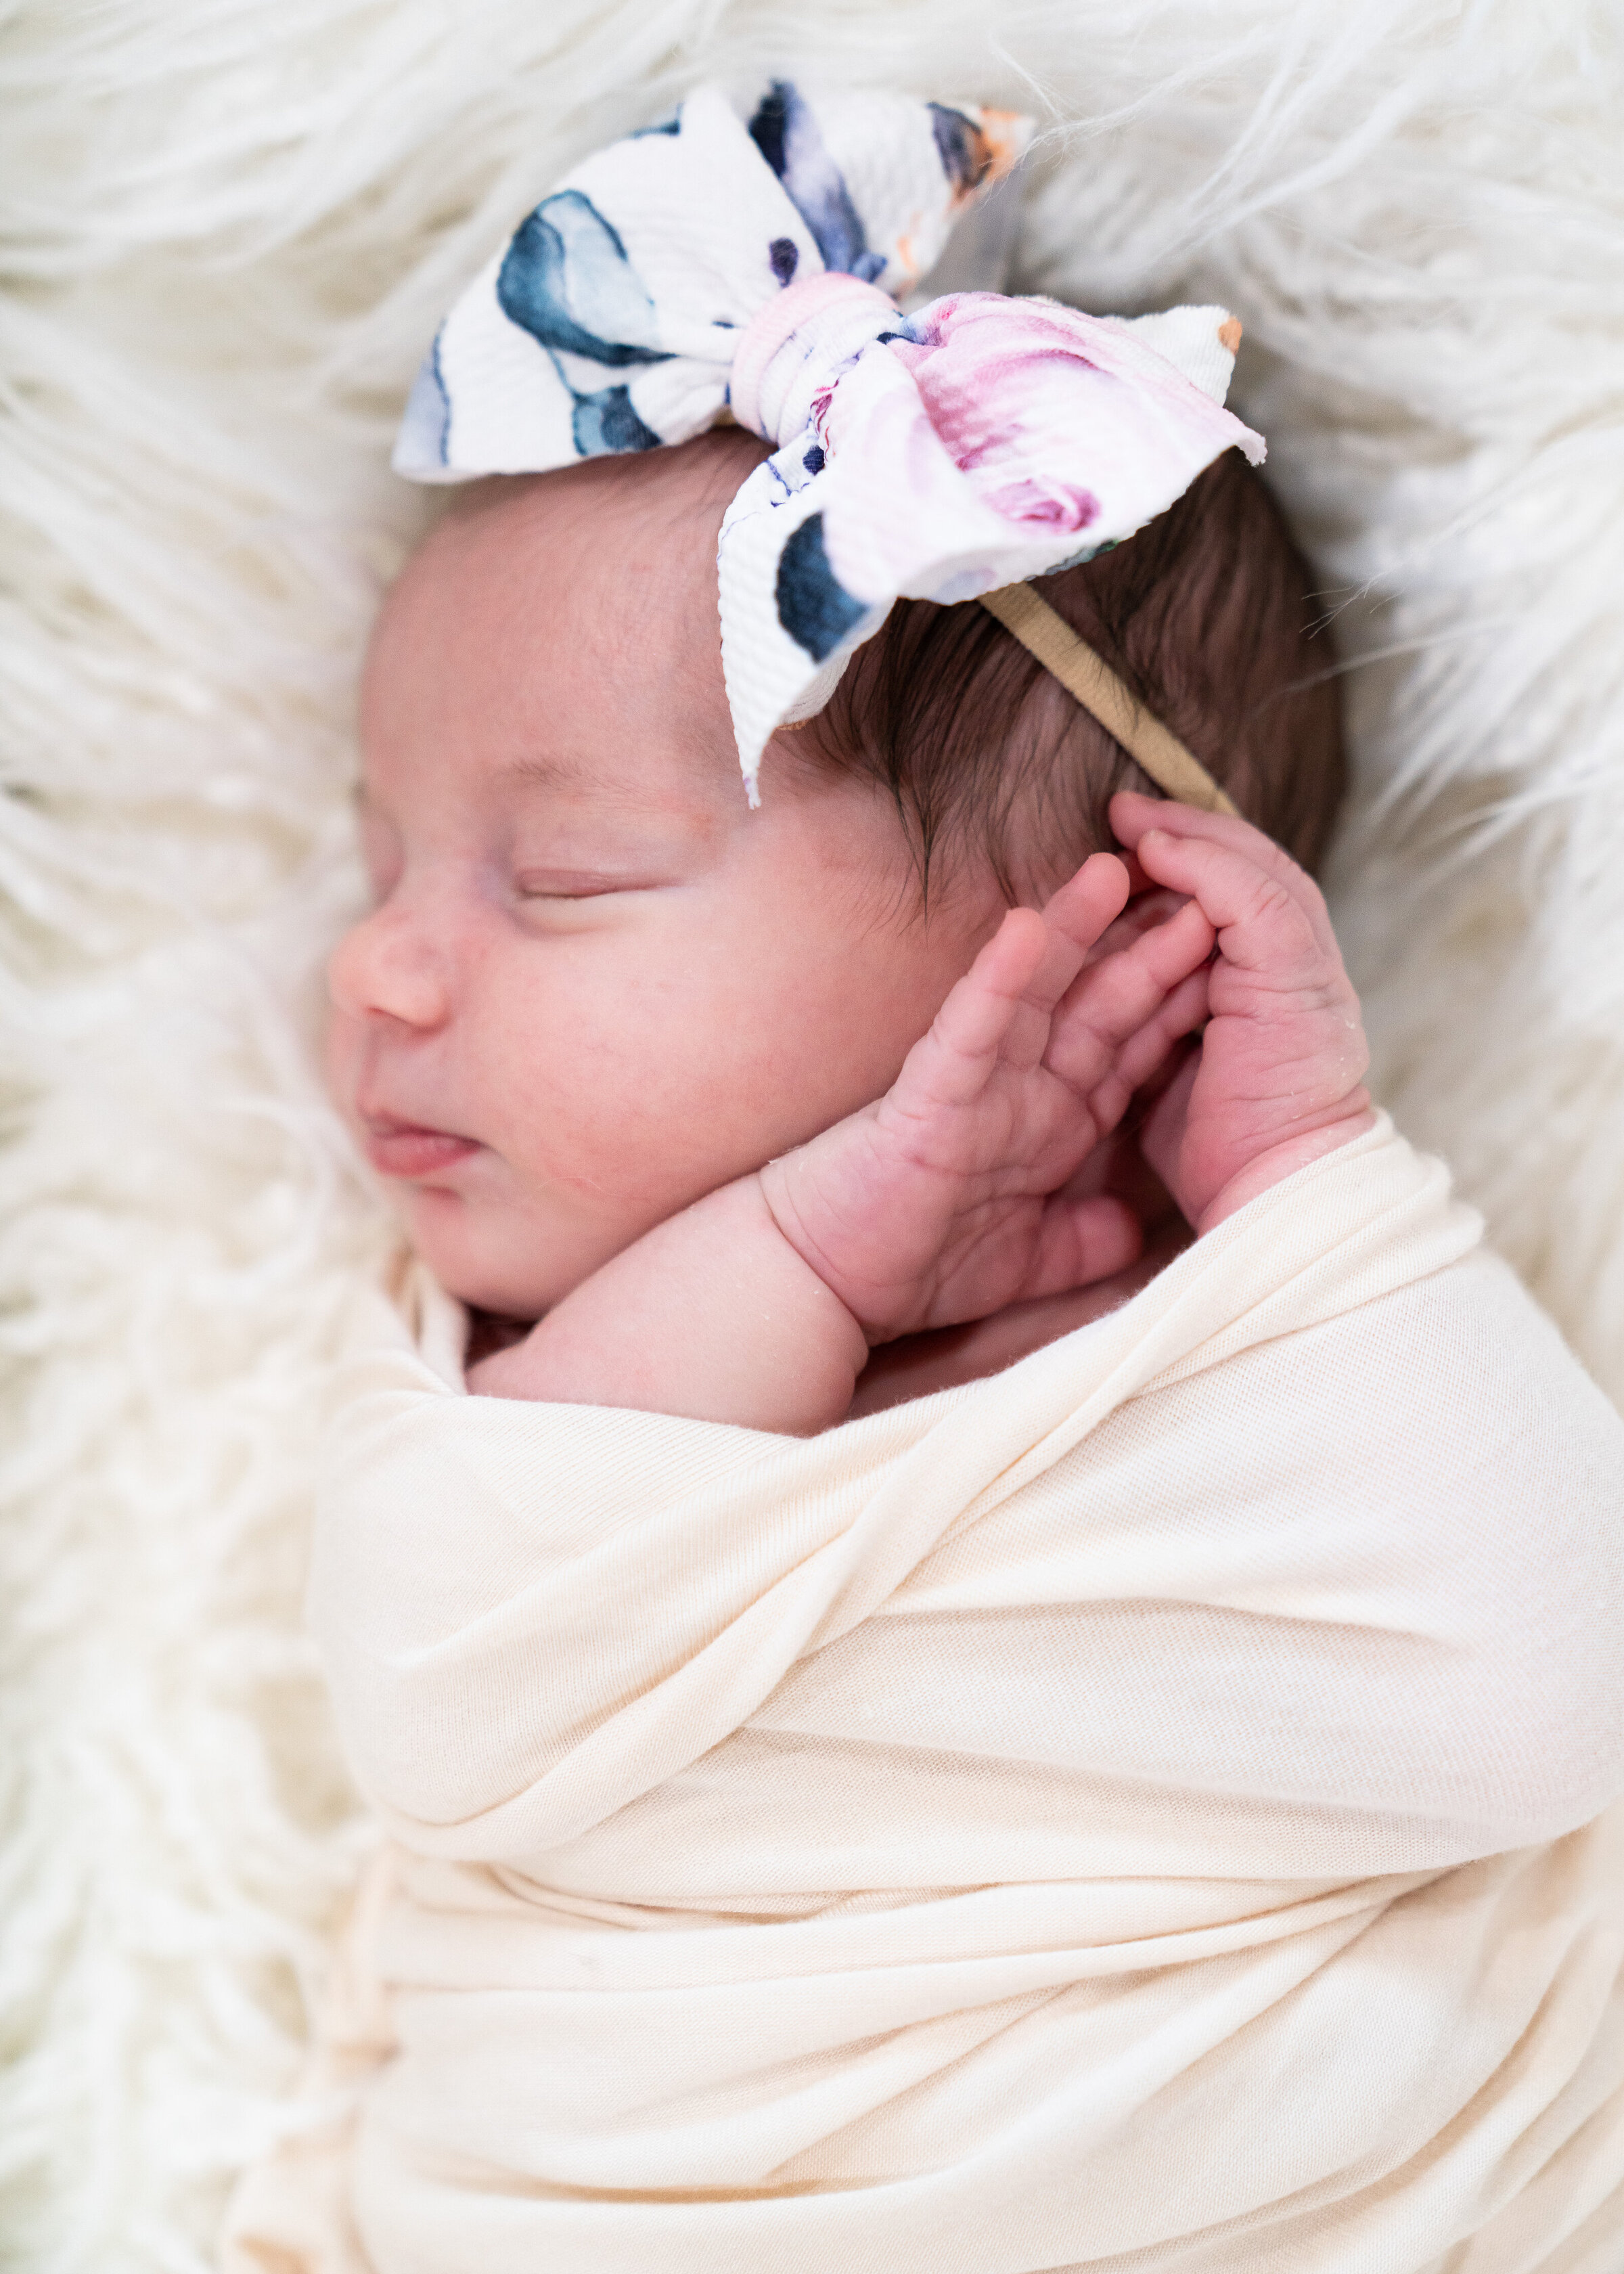 Newborn baby girl sleeping wearing a bow and wrapped in a cream colored cloth for her newborn photo shoot